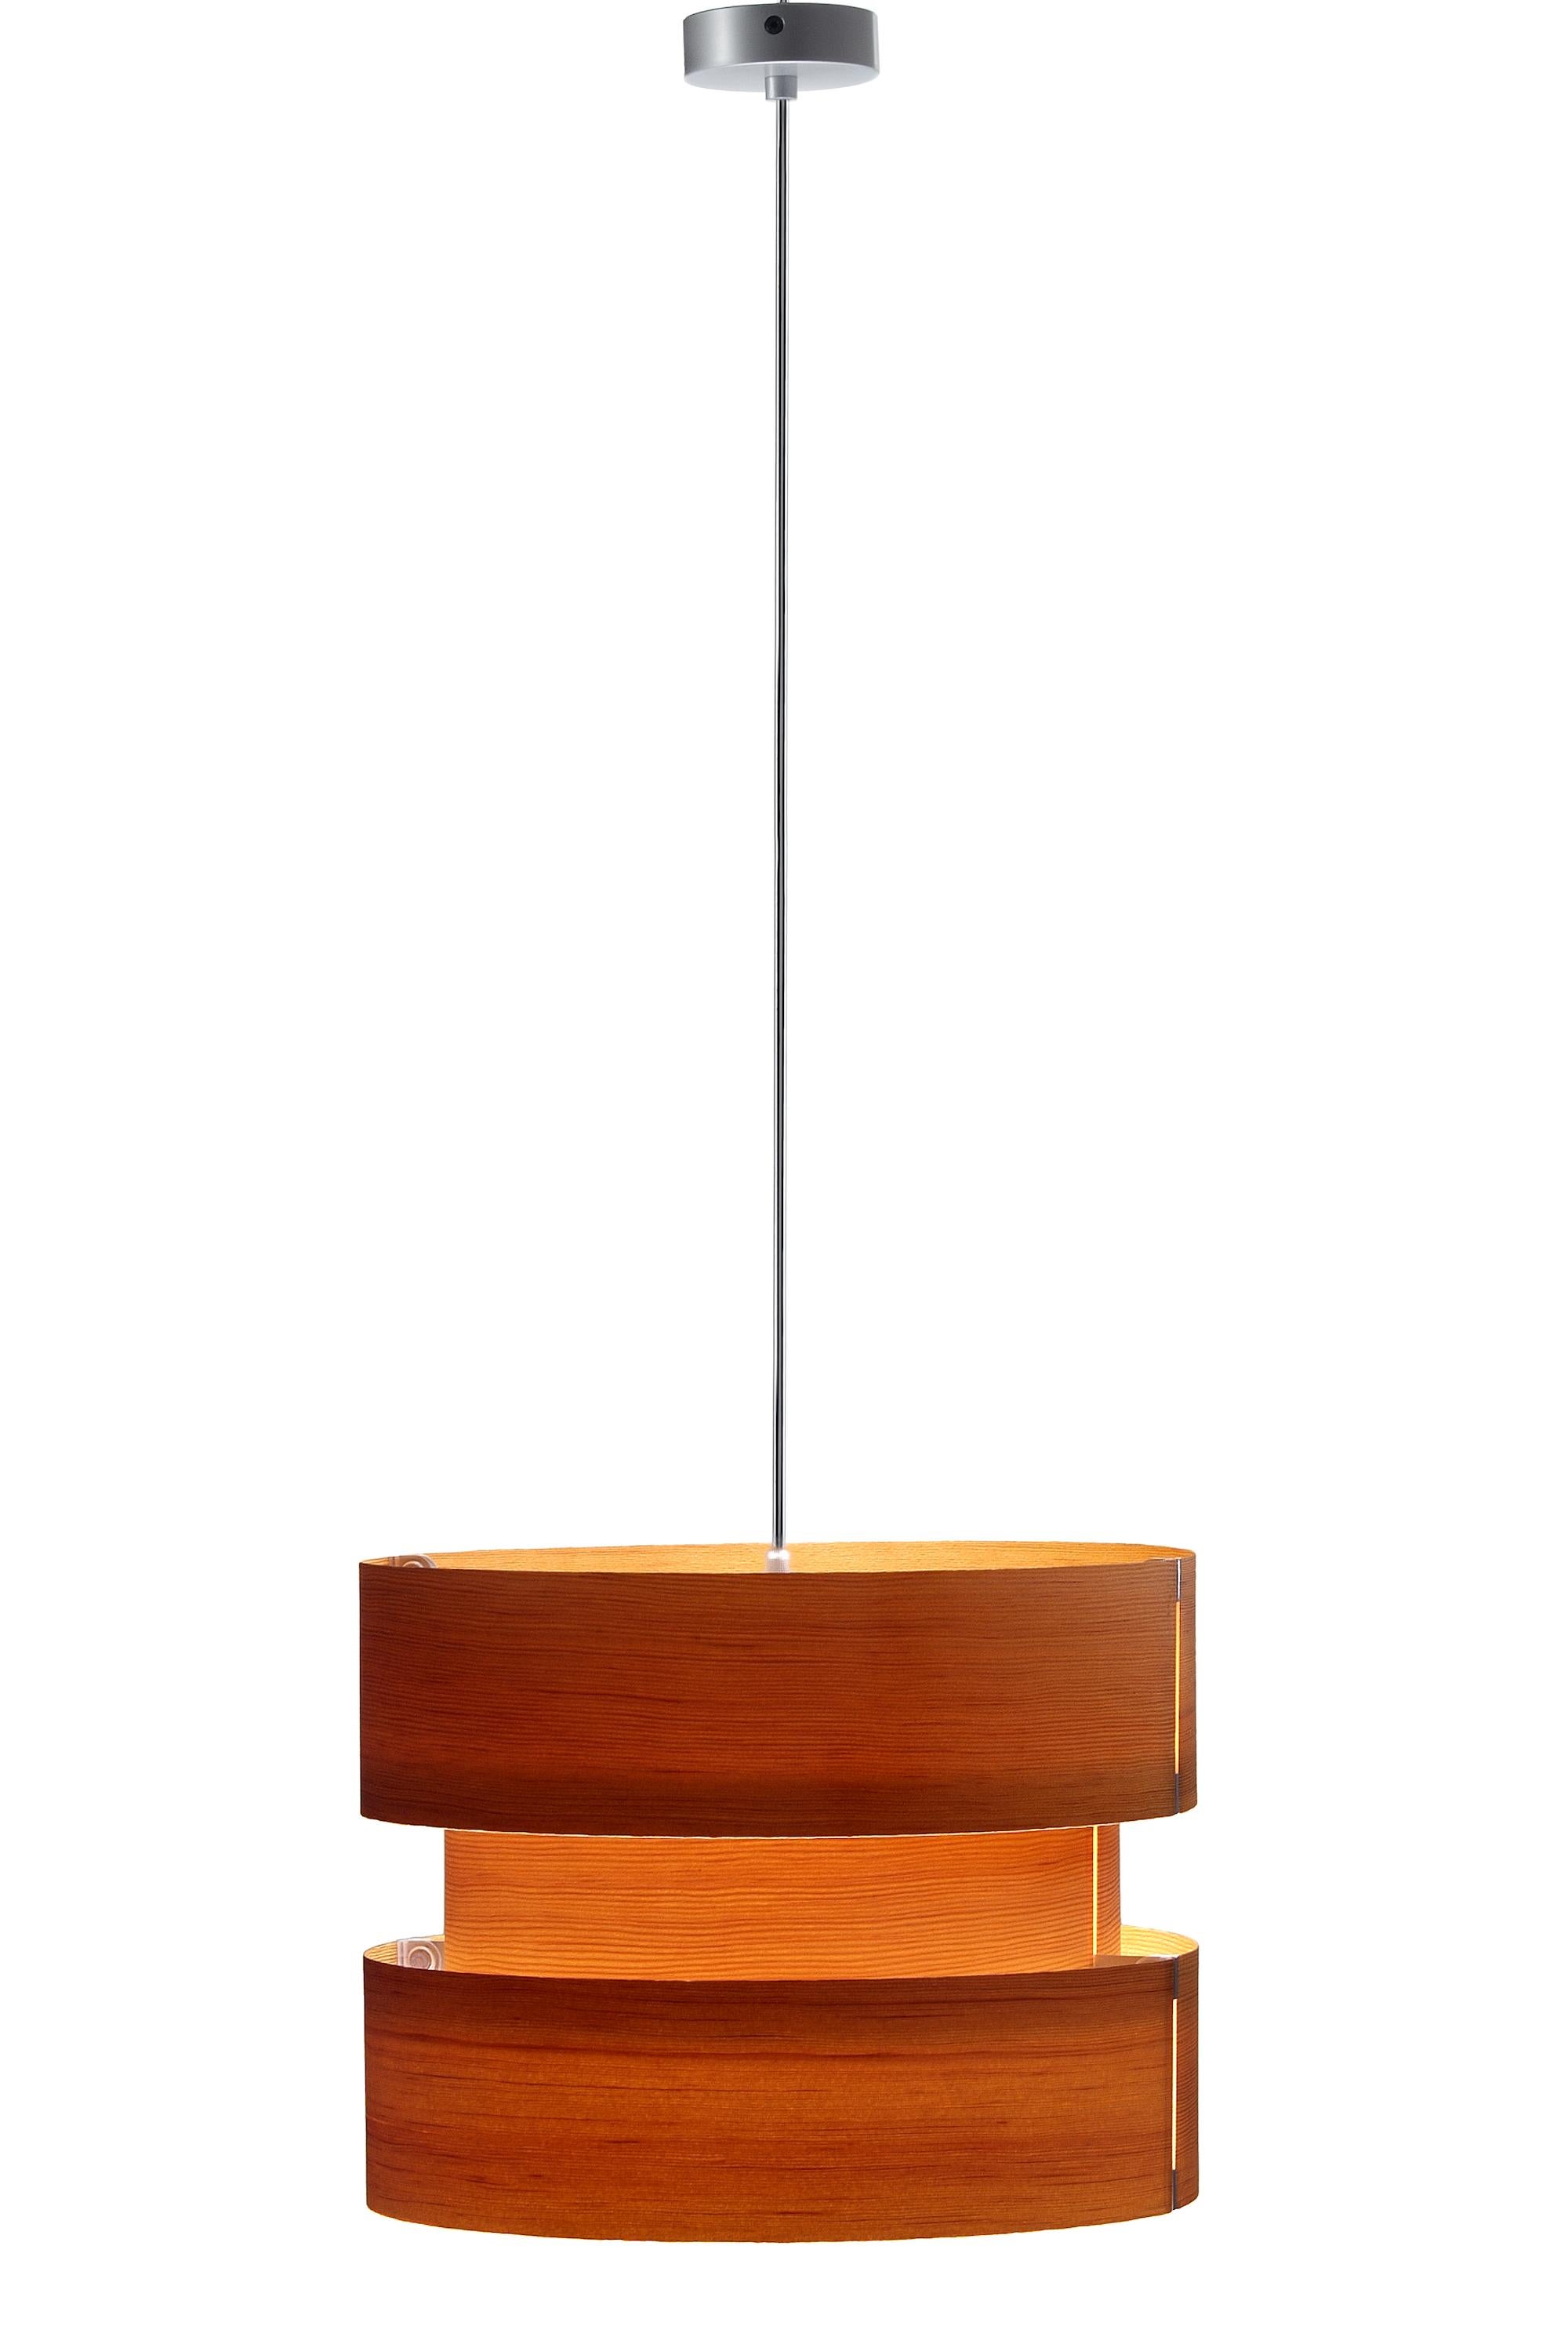 J.A. Coderch 'Cister' wood suspension lamp for Tunds. 

Pablo Picasso declared one of J.A. Coderch's bentwood designs to be 